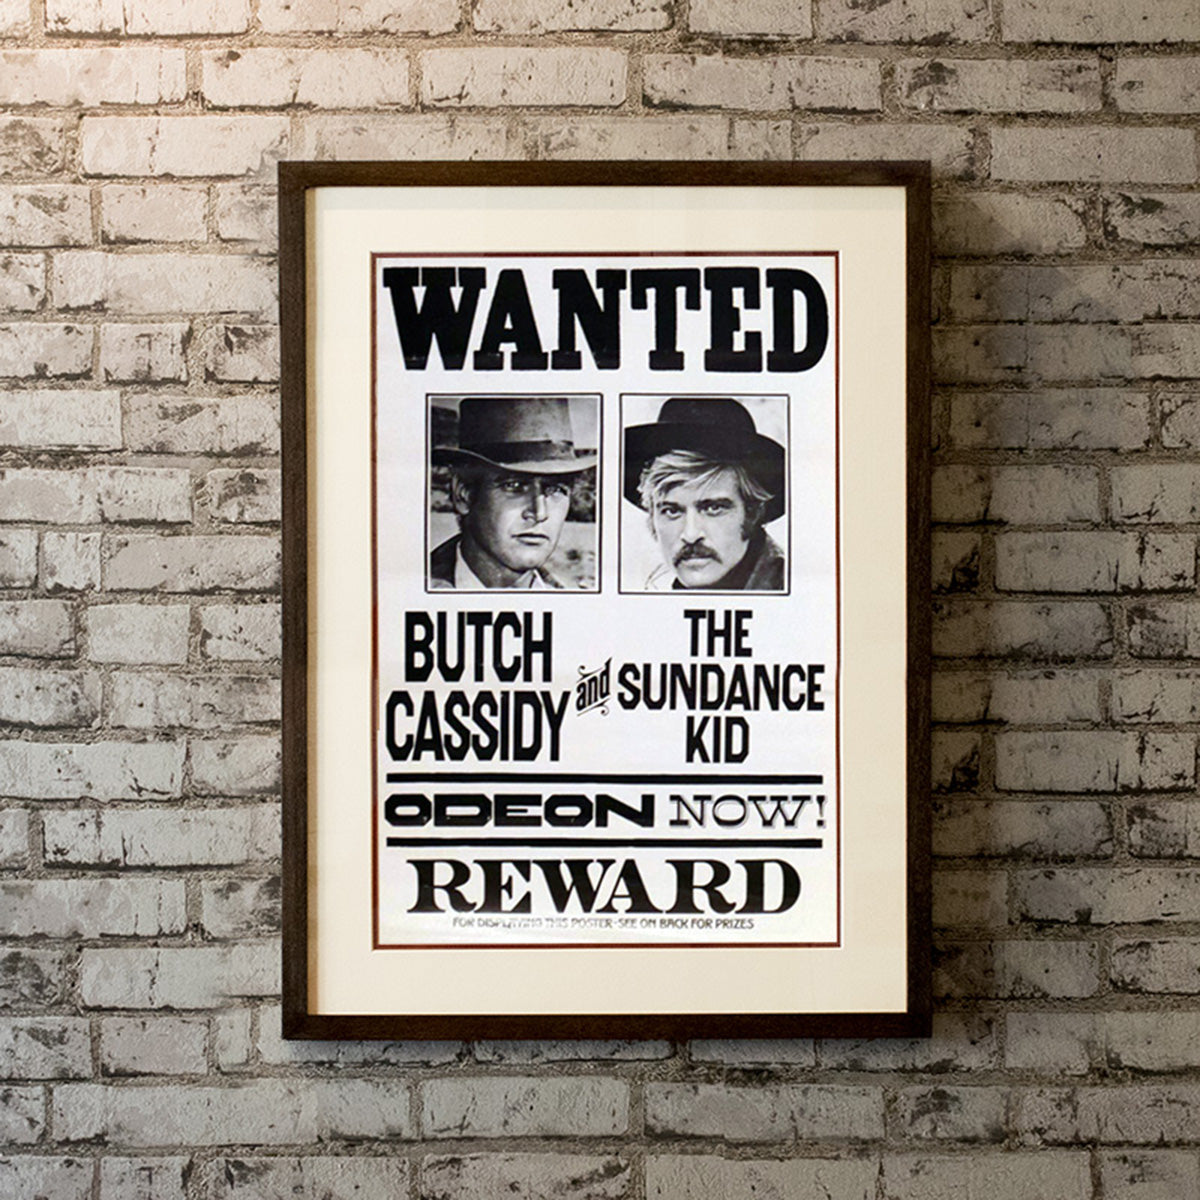 Original Movie Poster of Butch Cassidy And The Sundance Kid (1969)